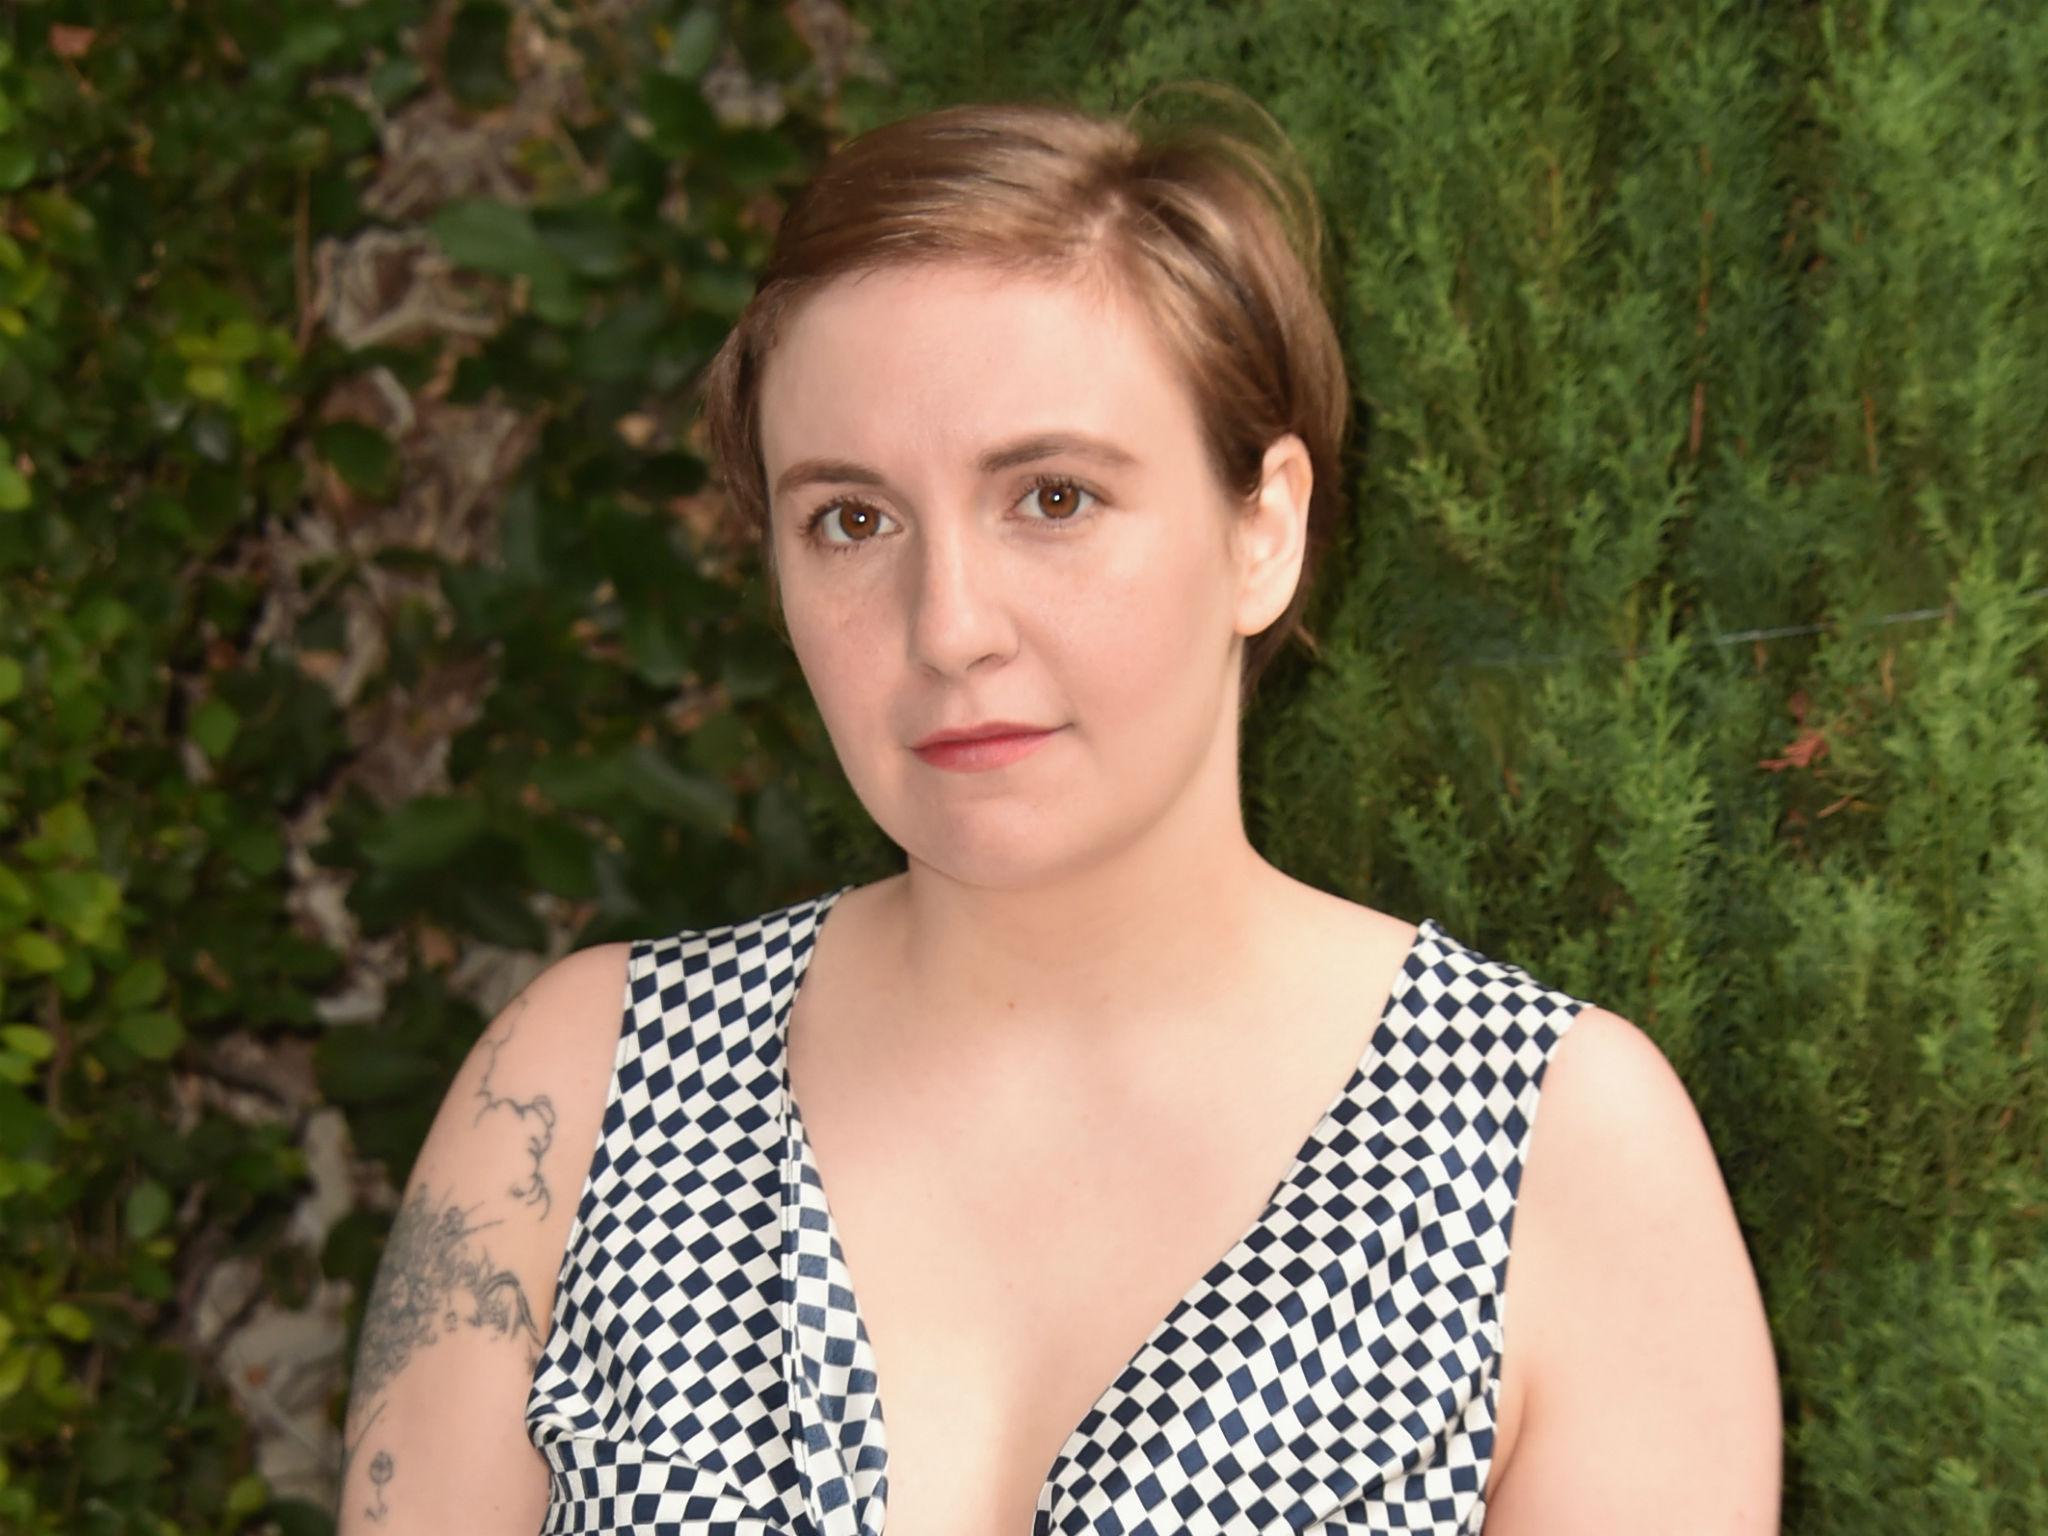 Stanford rape case Lena Dunham and the cast of Girls dedicate video message to survivor The Independent The Independent